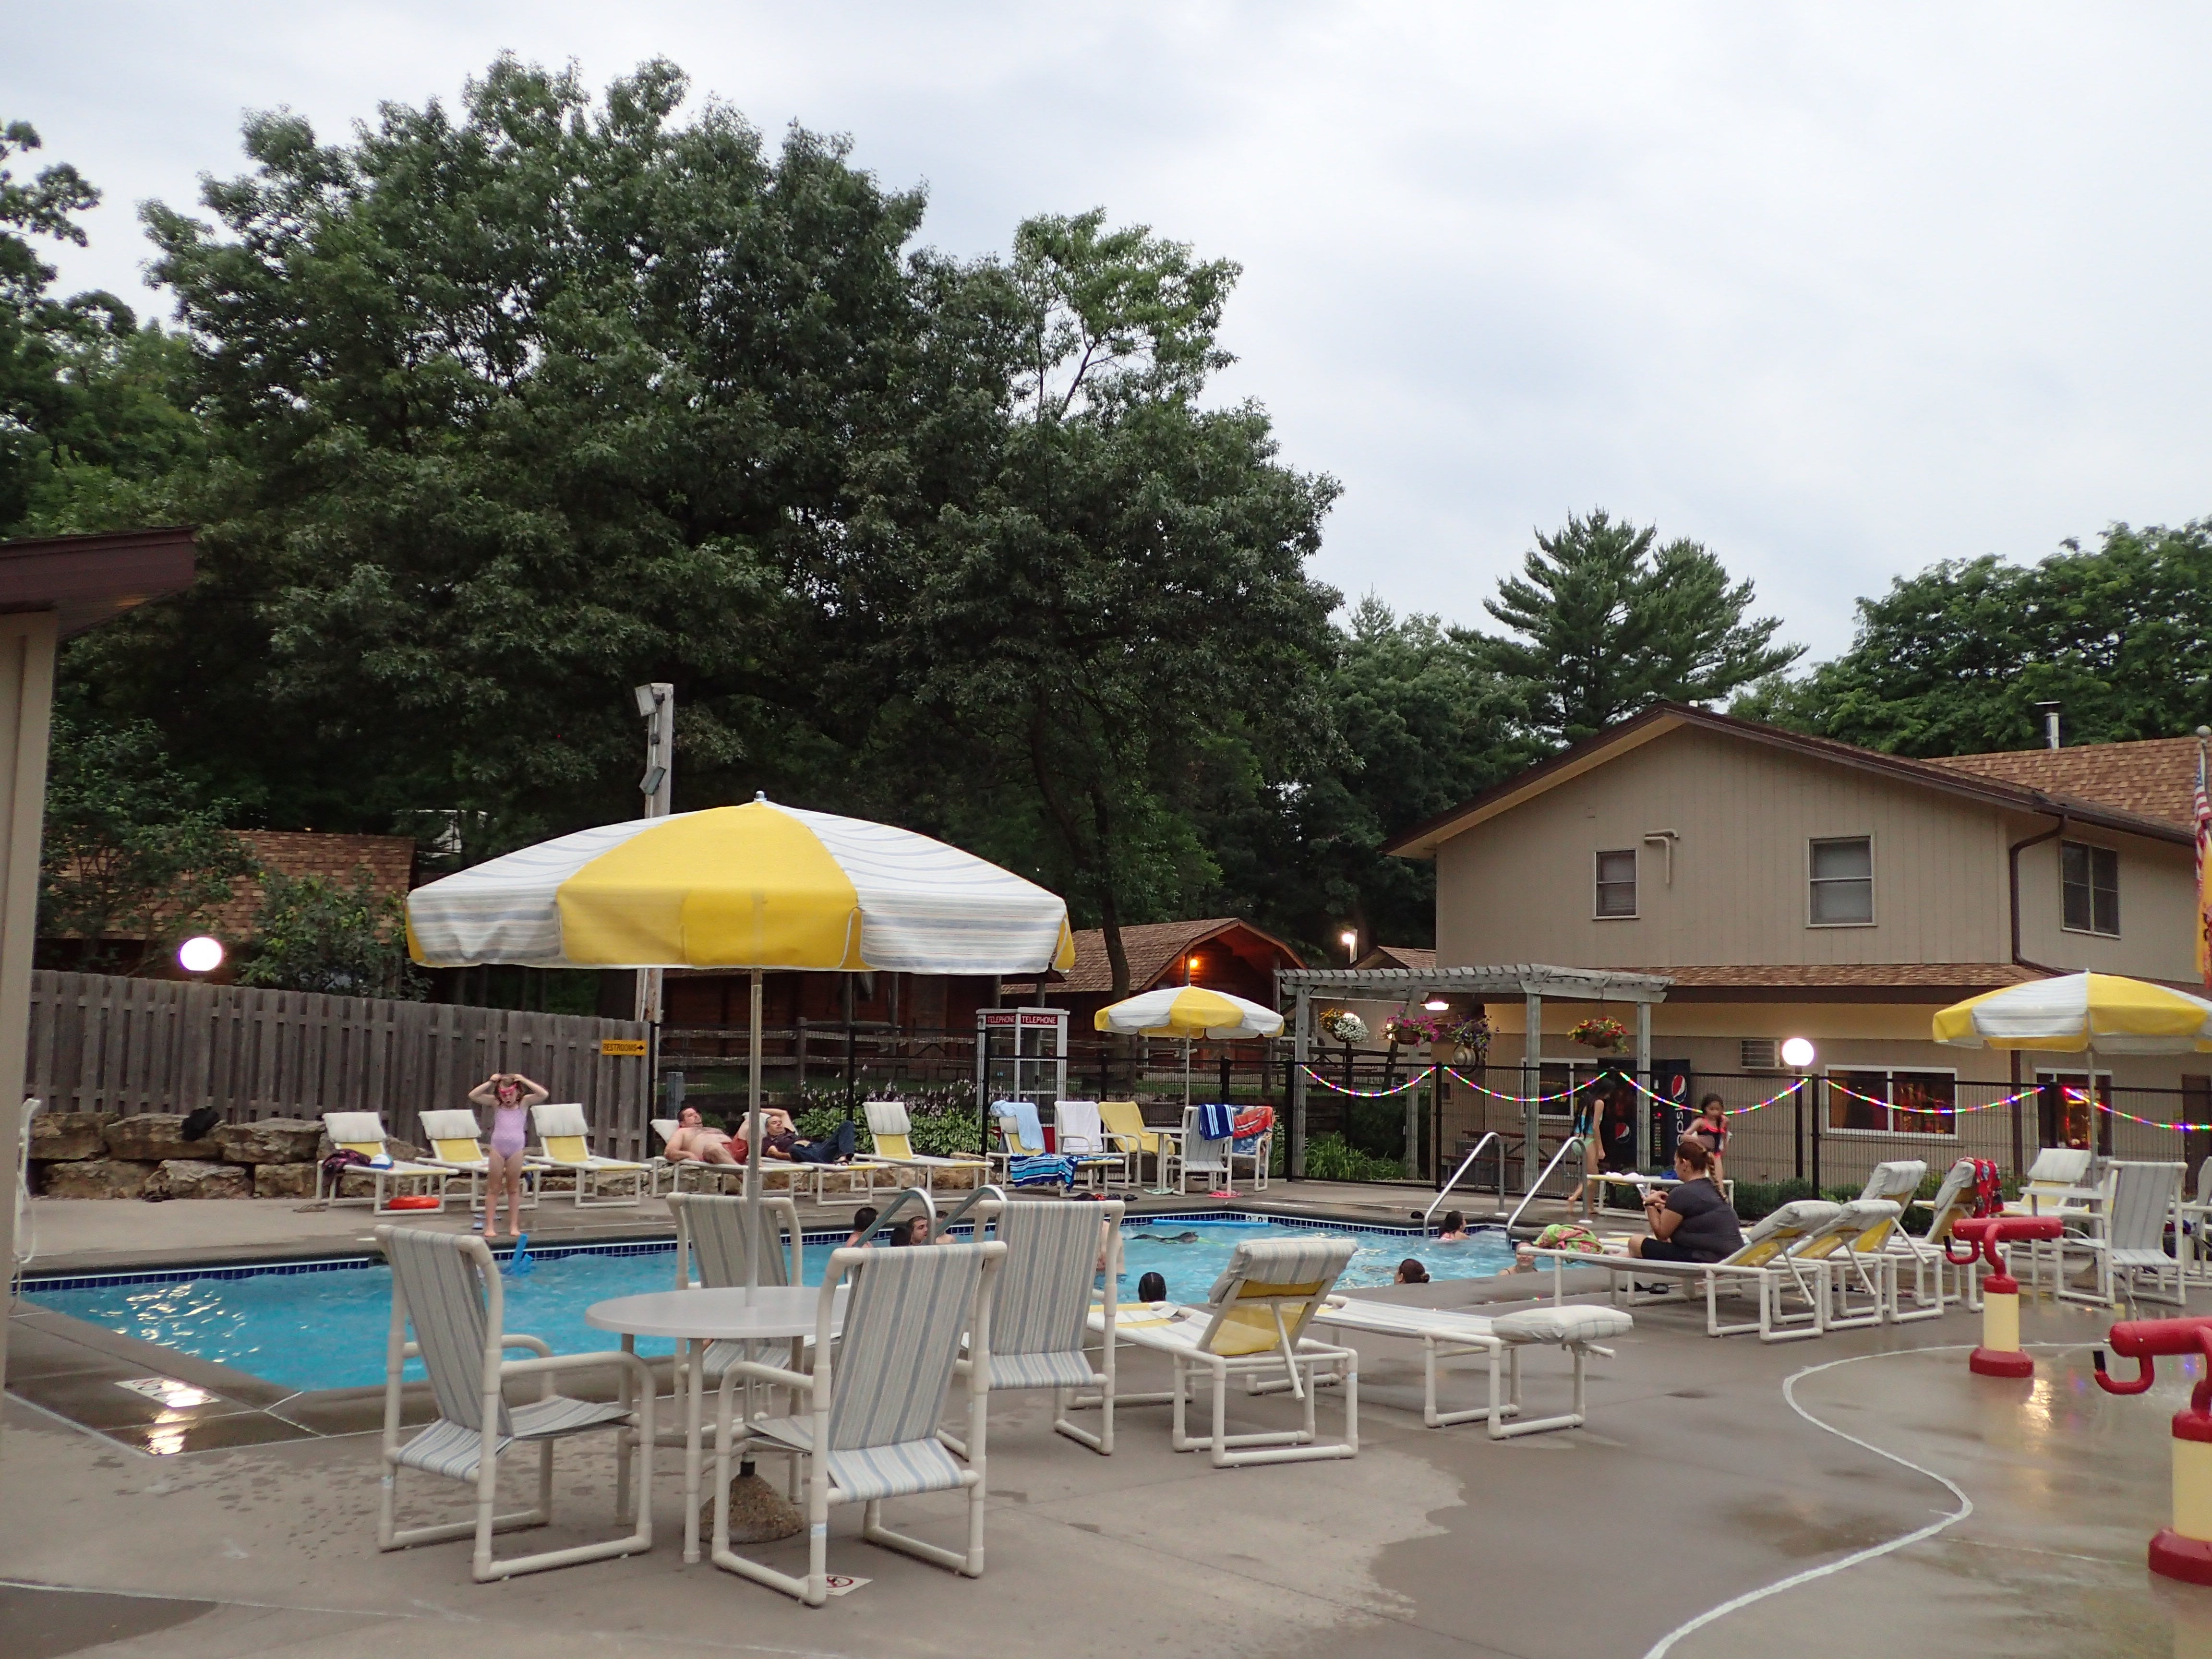 The pool within the campground - the store and office is right next door